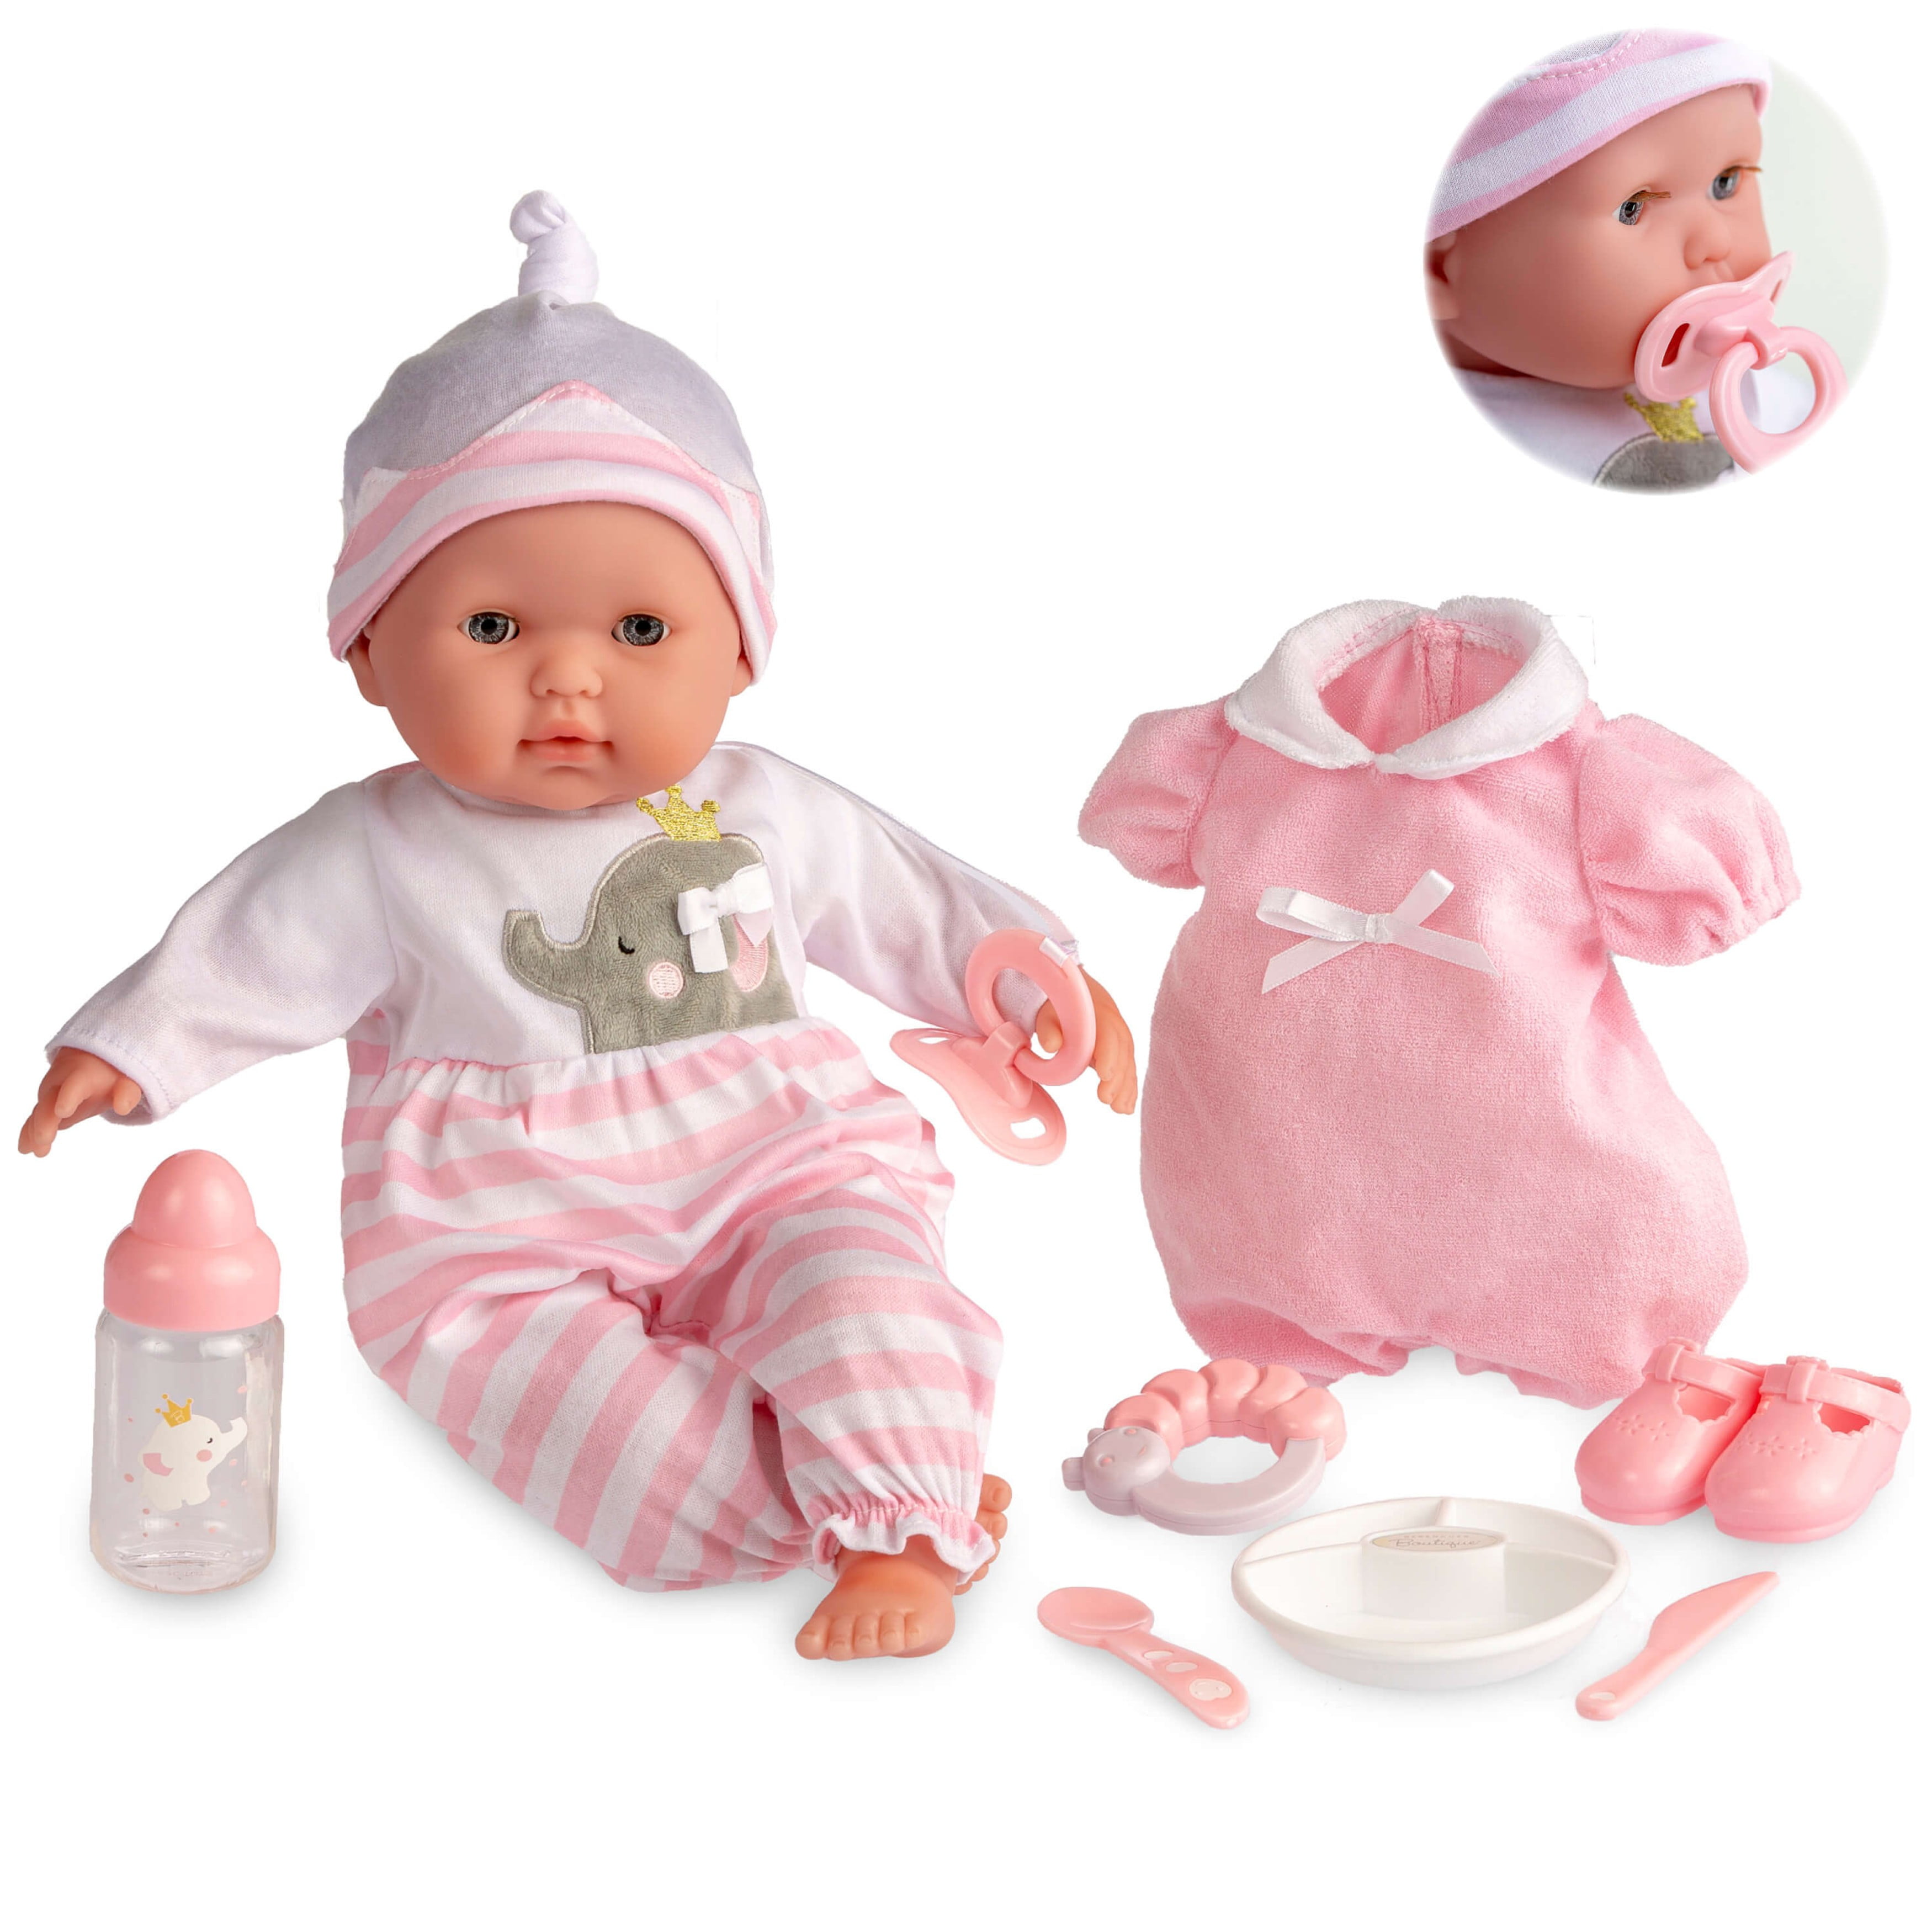 Brown Eyes for sale online Baby Annabell 916939 Soft-bodied Baby Doll 